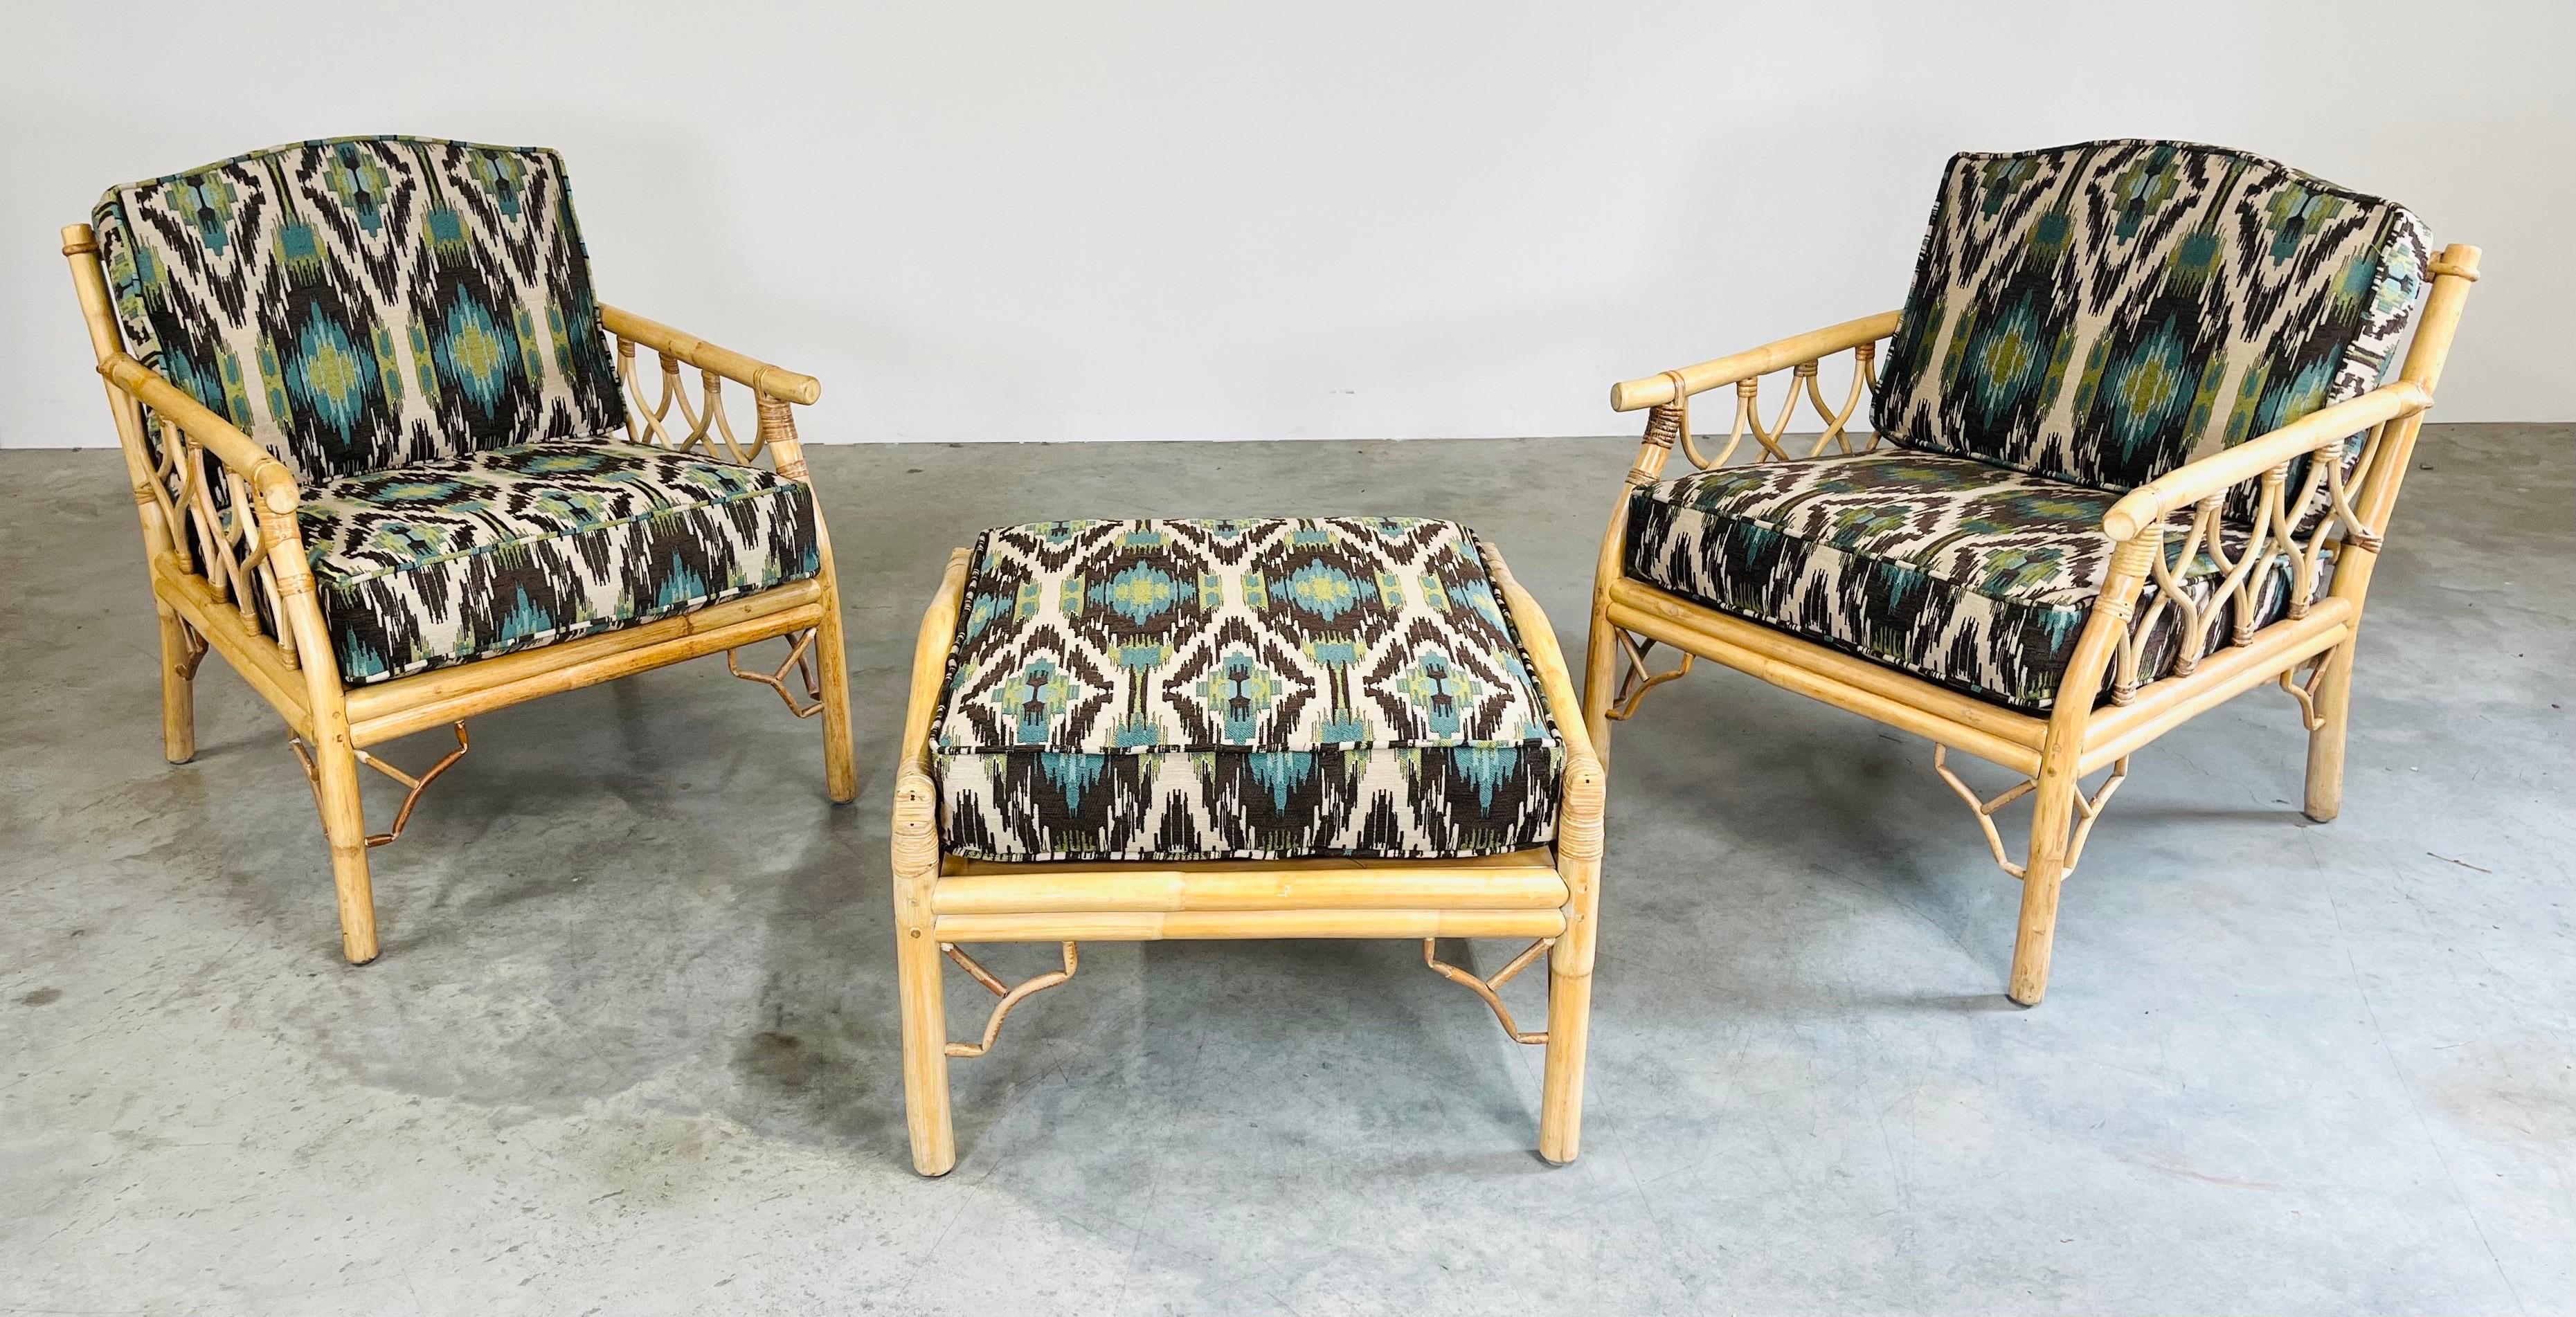 American Mid 20th c. Chinese Chippendale Bamboo Rattan Lounge Chairs & Matching Ottoman For Sale